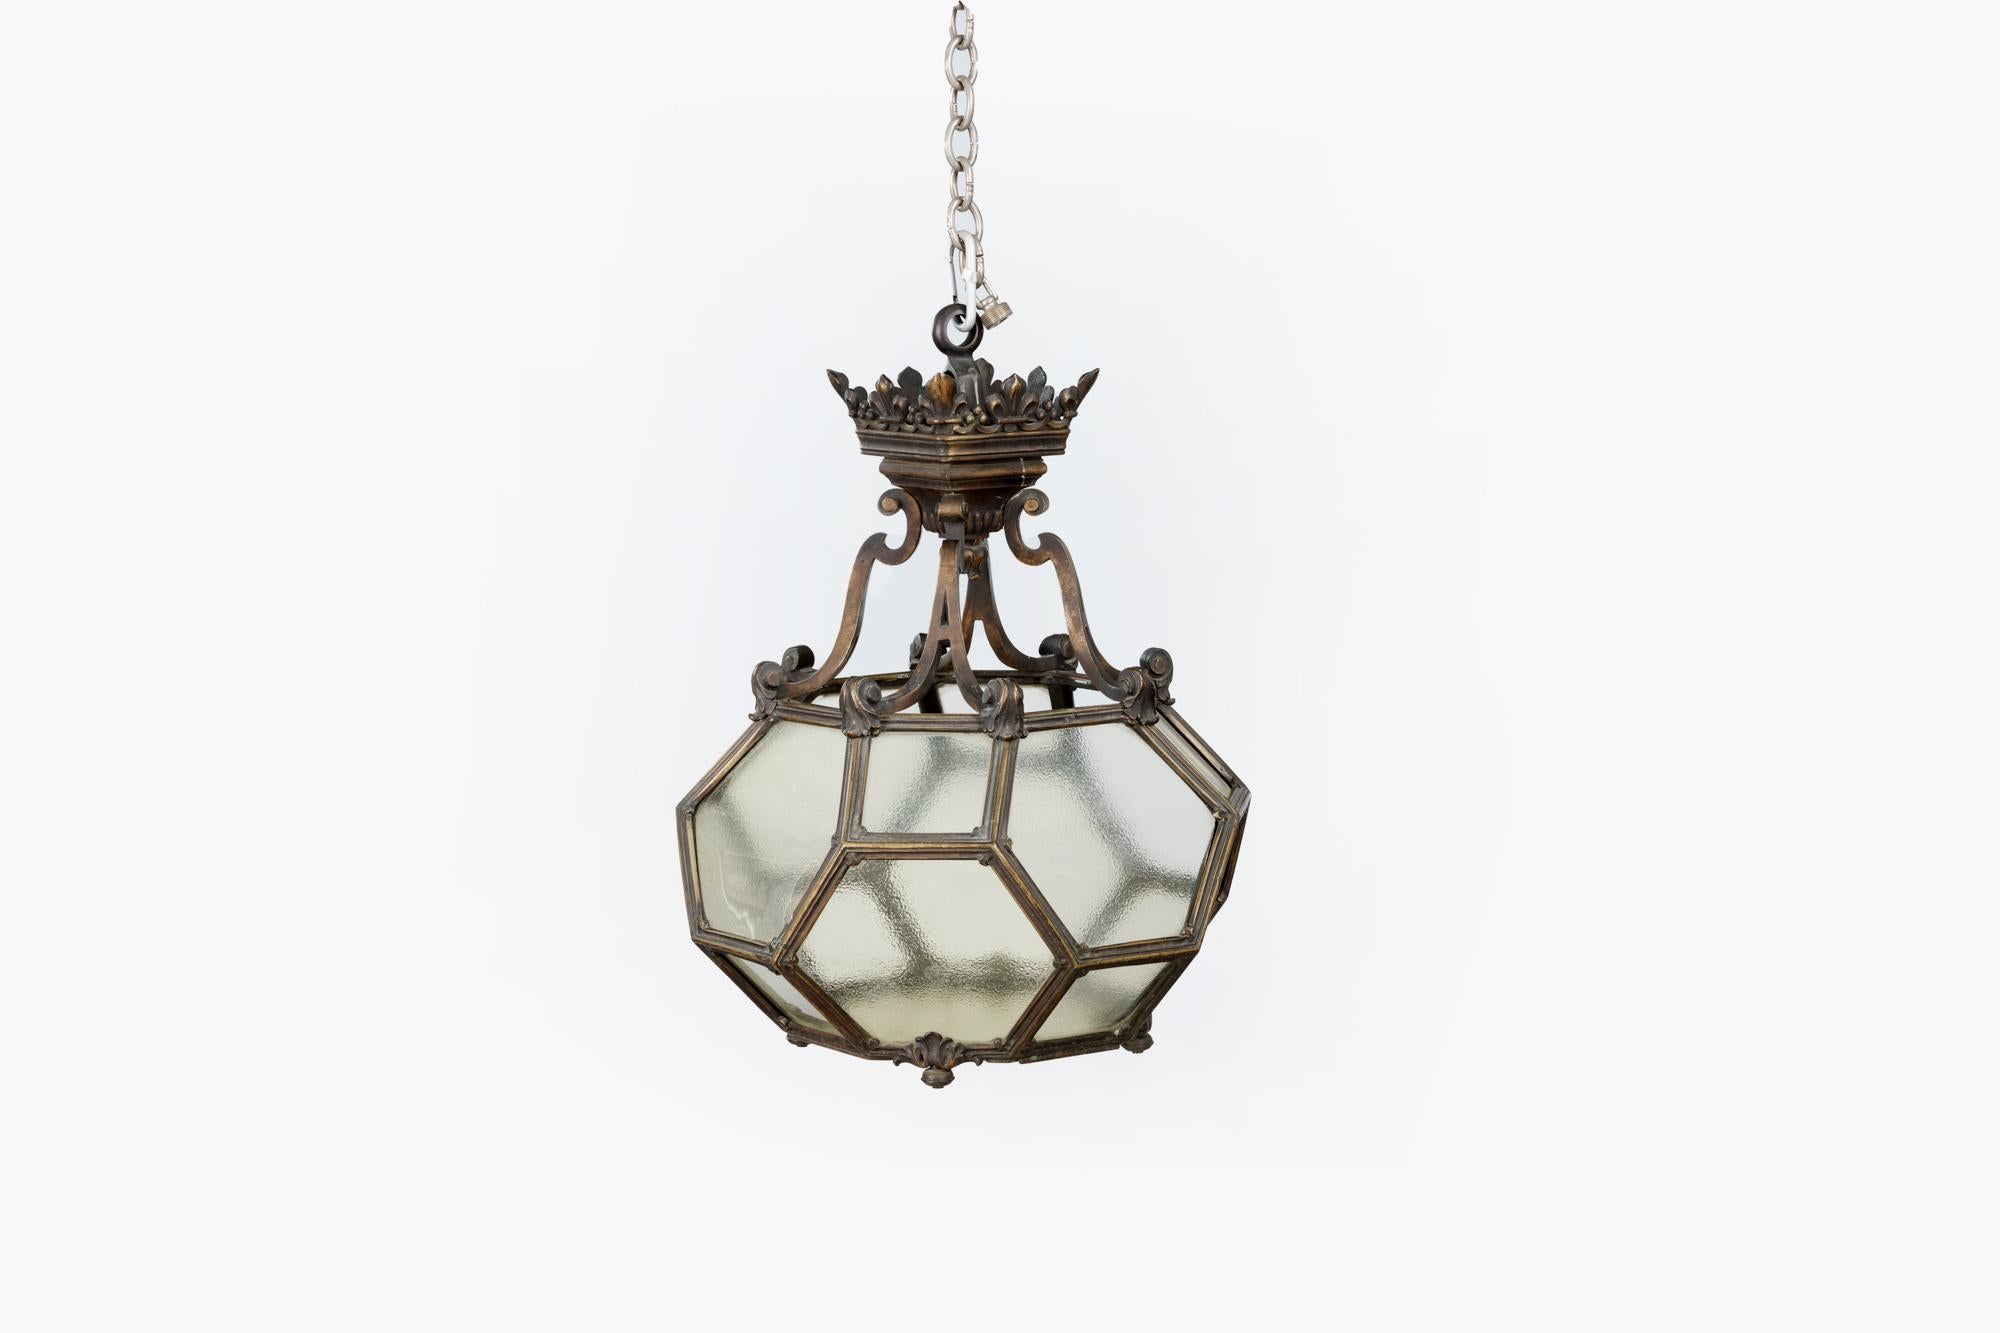 19th Century unusual brass lantern of geometric form. Featuring hexagonal and square glass panels, including a door with a chain locking mechanism. Boasting four scroll arms and trefoil detail to top.